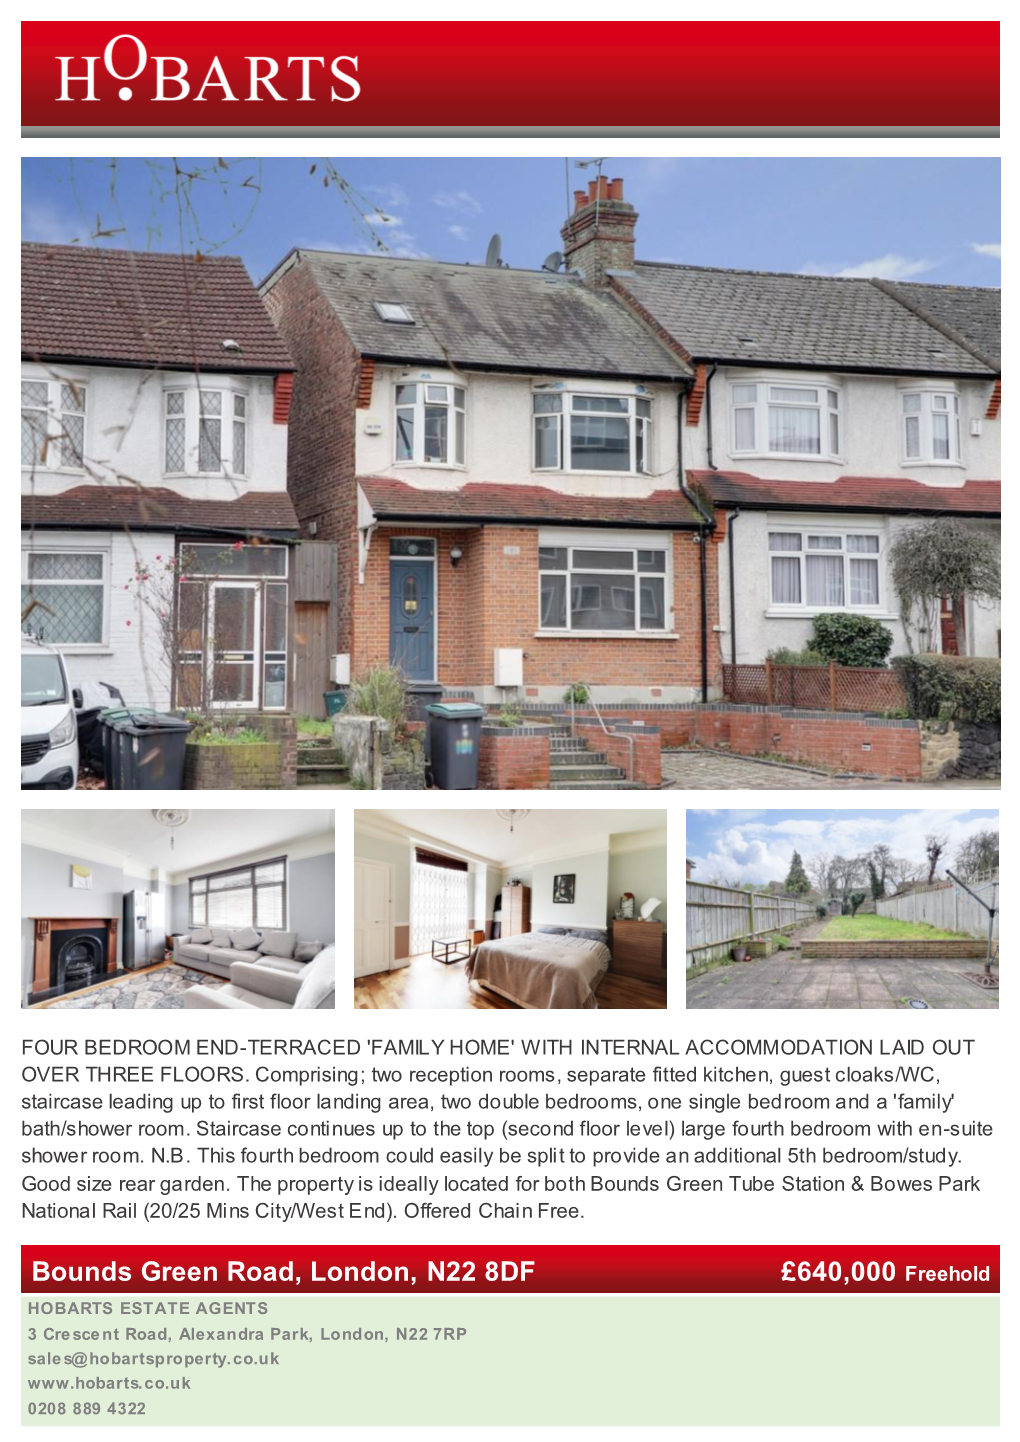 Bounds Green Road, London, N22 8DF £640,000 Freehold